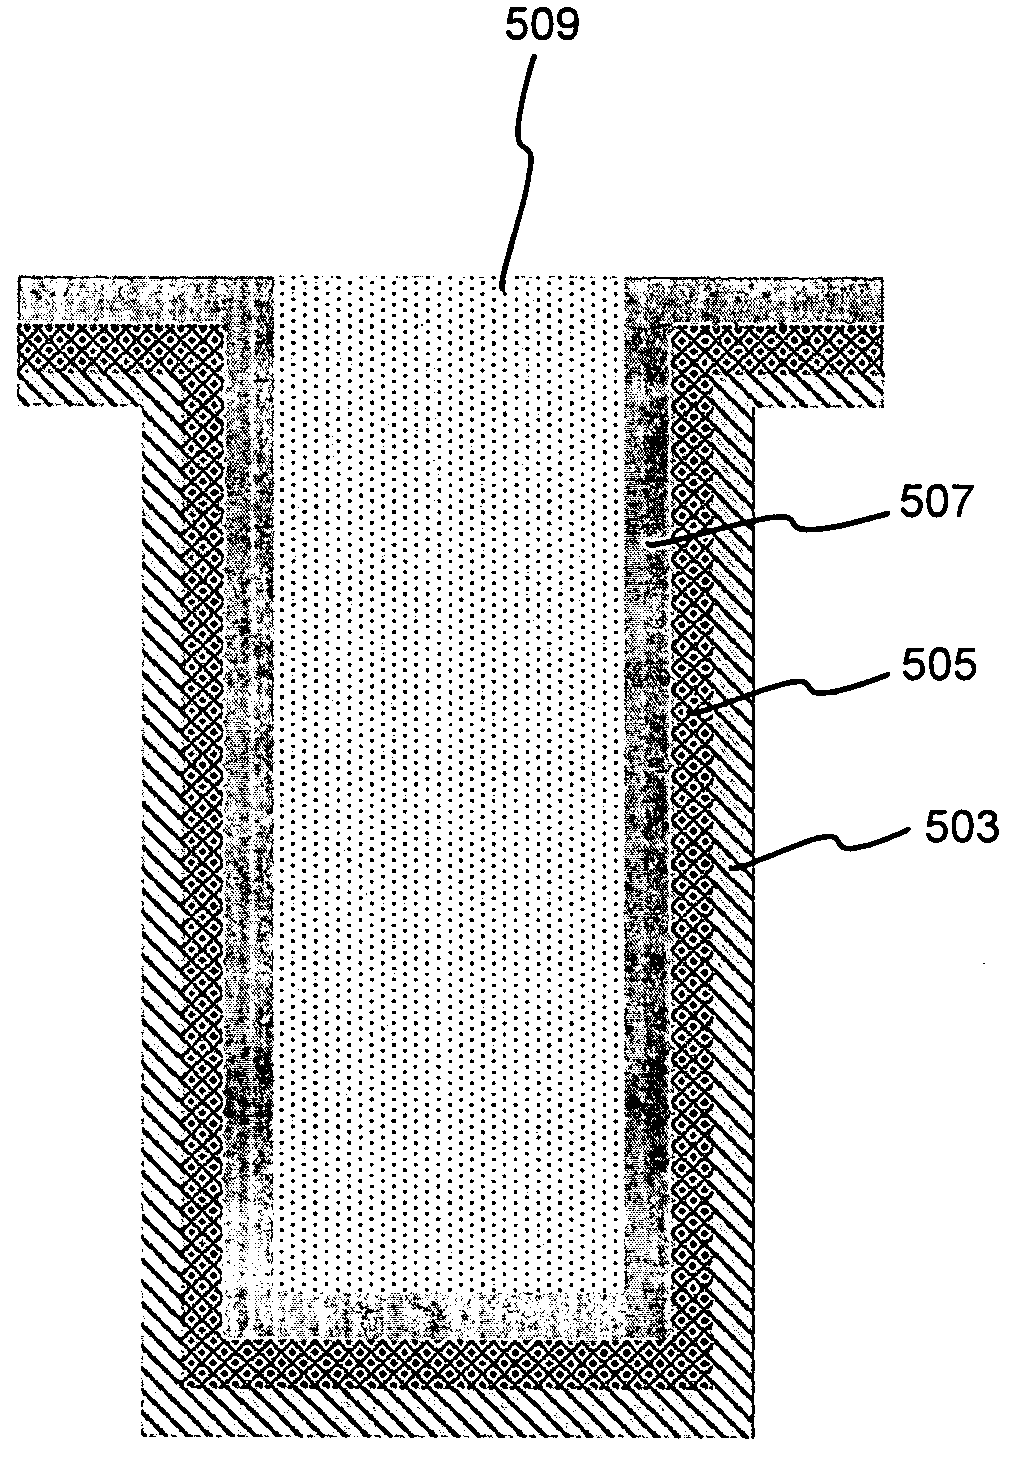 Method for depositing thin tungsten film with low resistivity and robust micro-adhesion characteristics